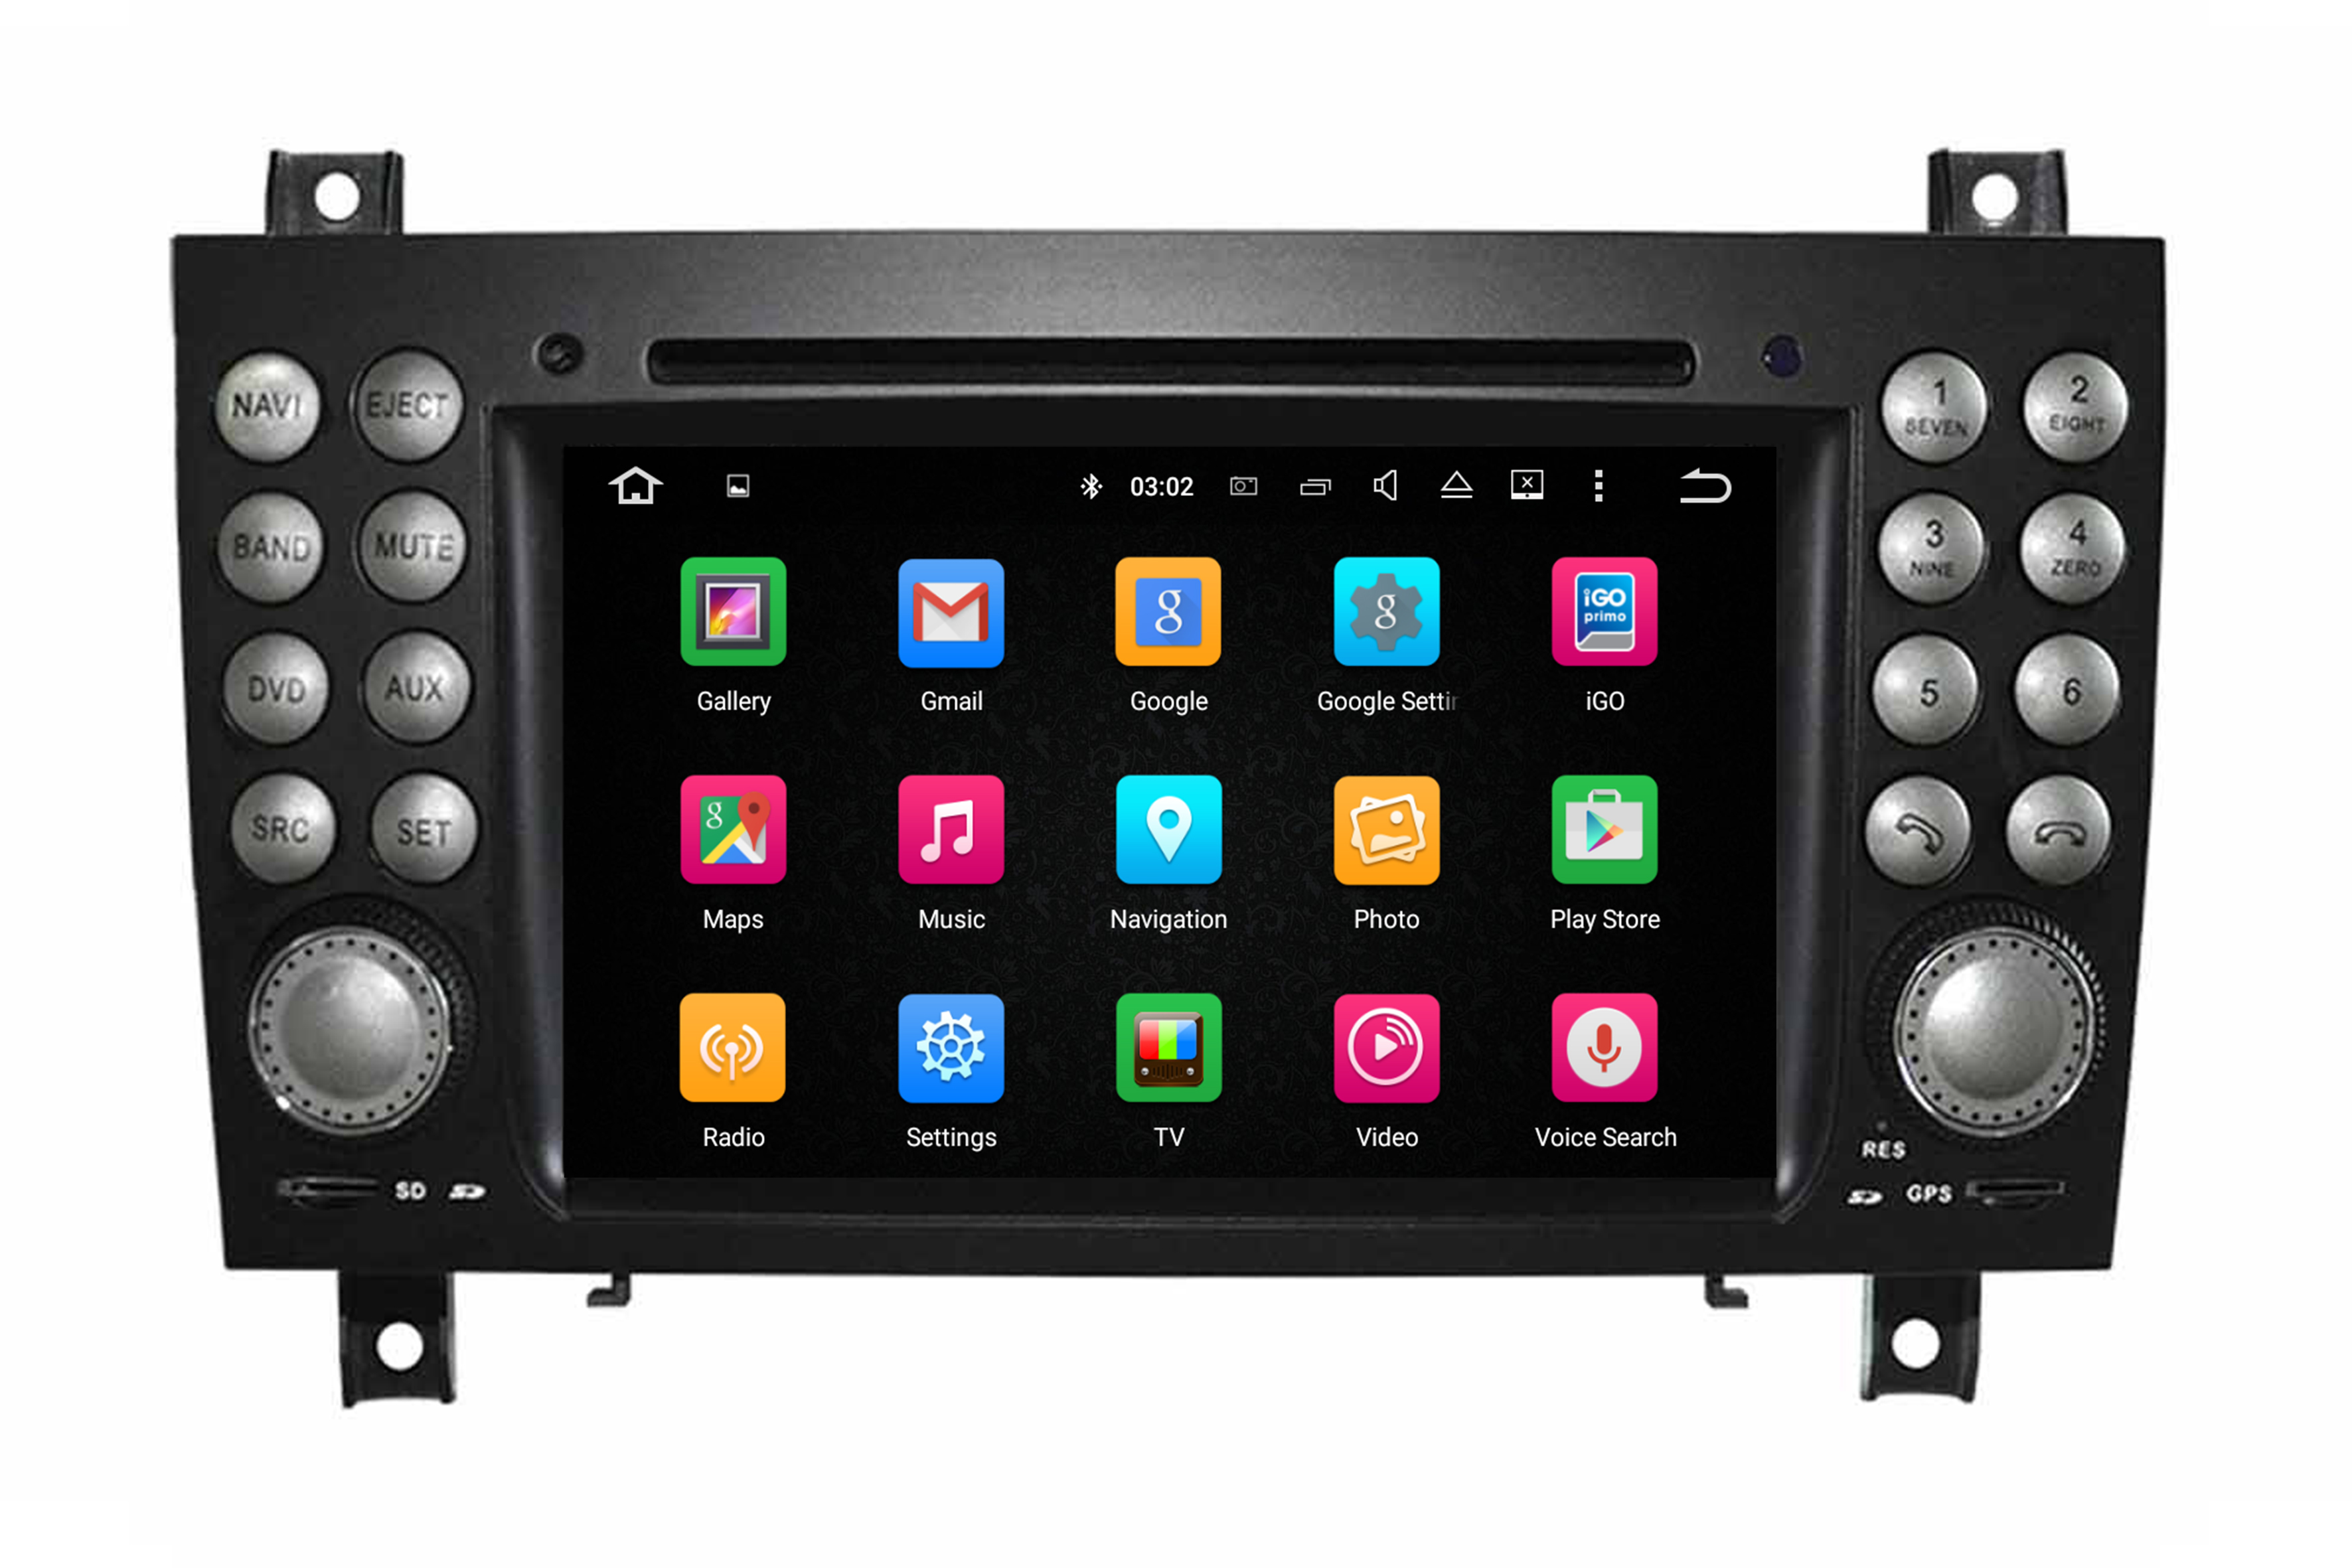 Hualingan Autoradio for Mercedes SLK R171 W171 Radio Upgrade Stereo Head Unit Upgrade 7"Touch Screen DVD Apple CarPlay Android Auto Replacement Aftermarket GPS Navigation Bluetooth 2004 2007 2008 2010